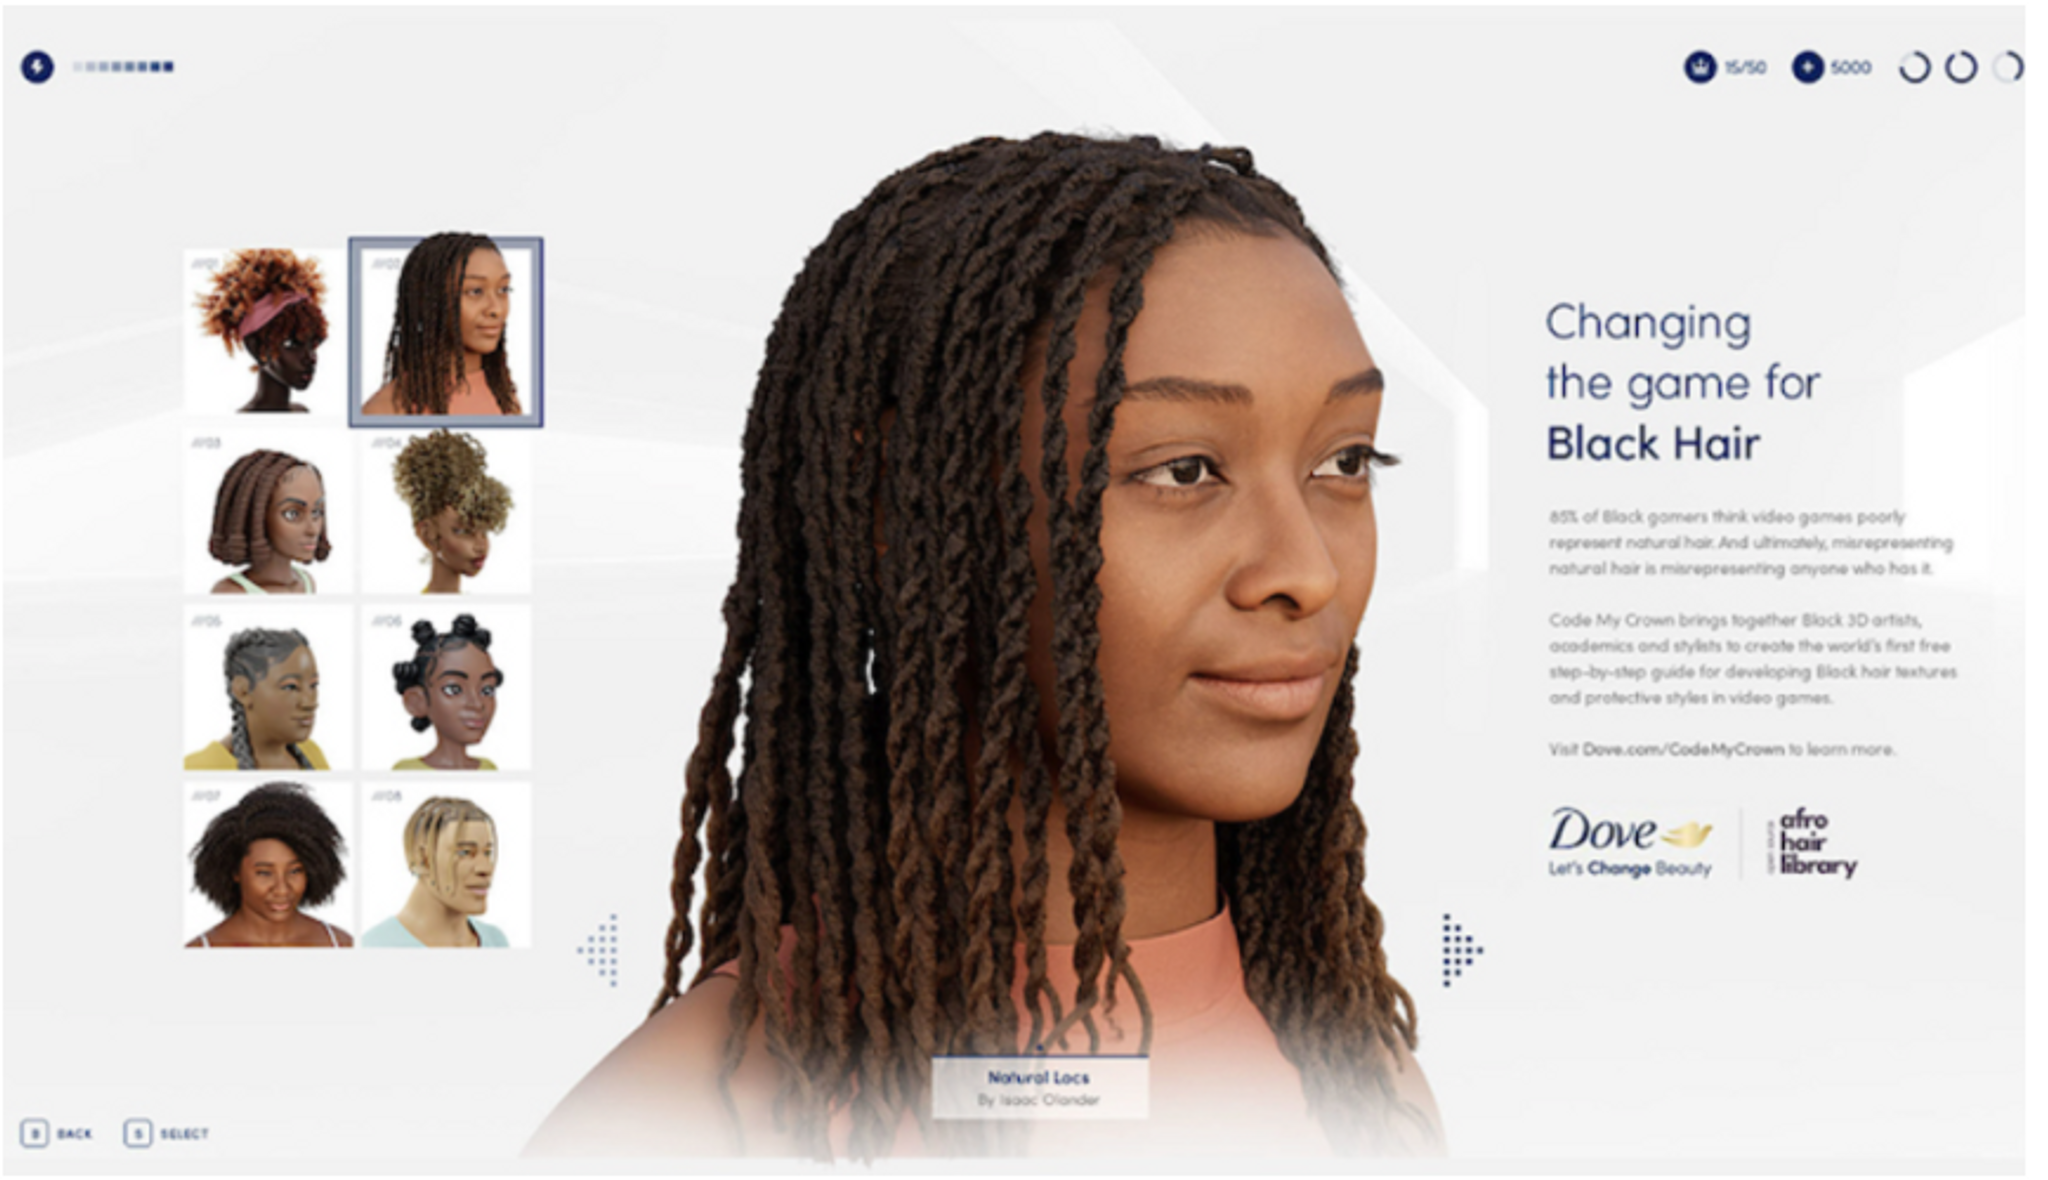 Dove guide pushes for Black hair representation in games